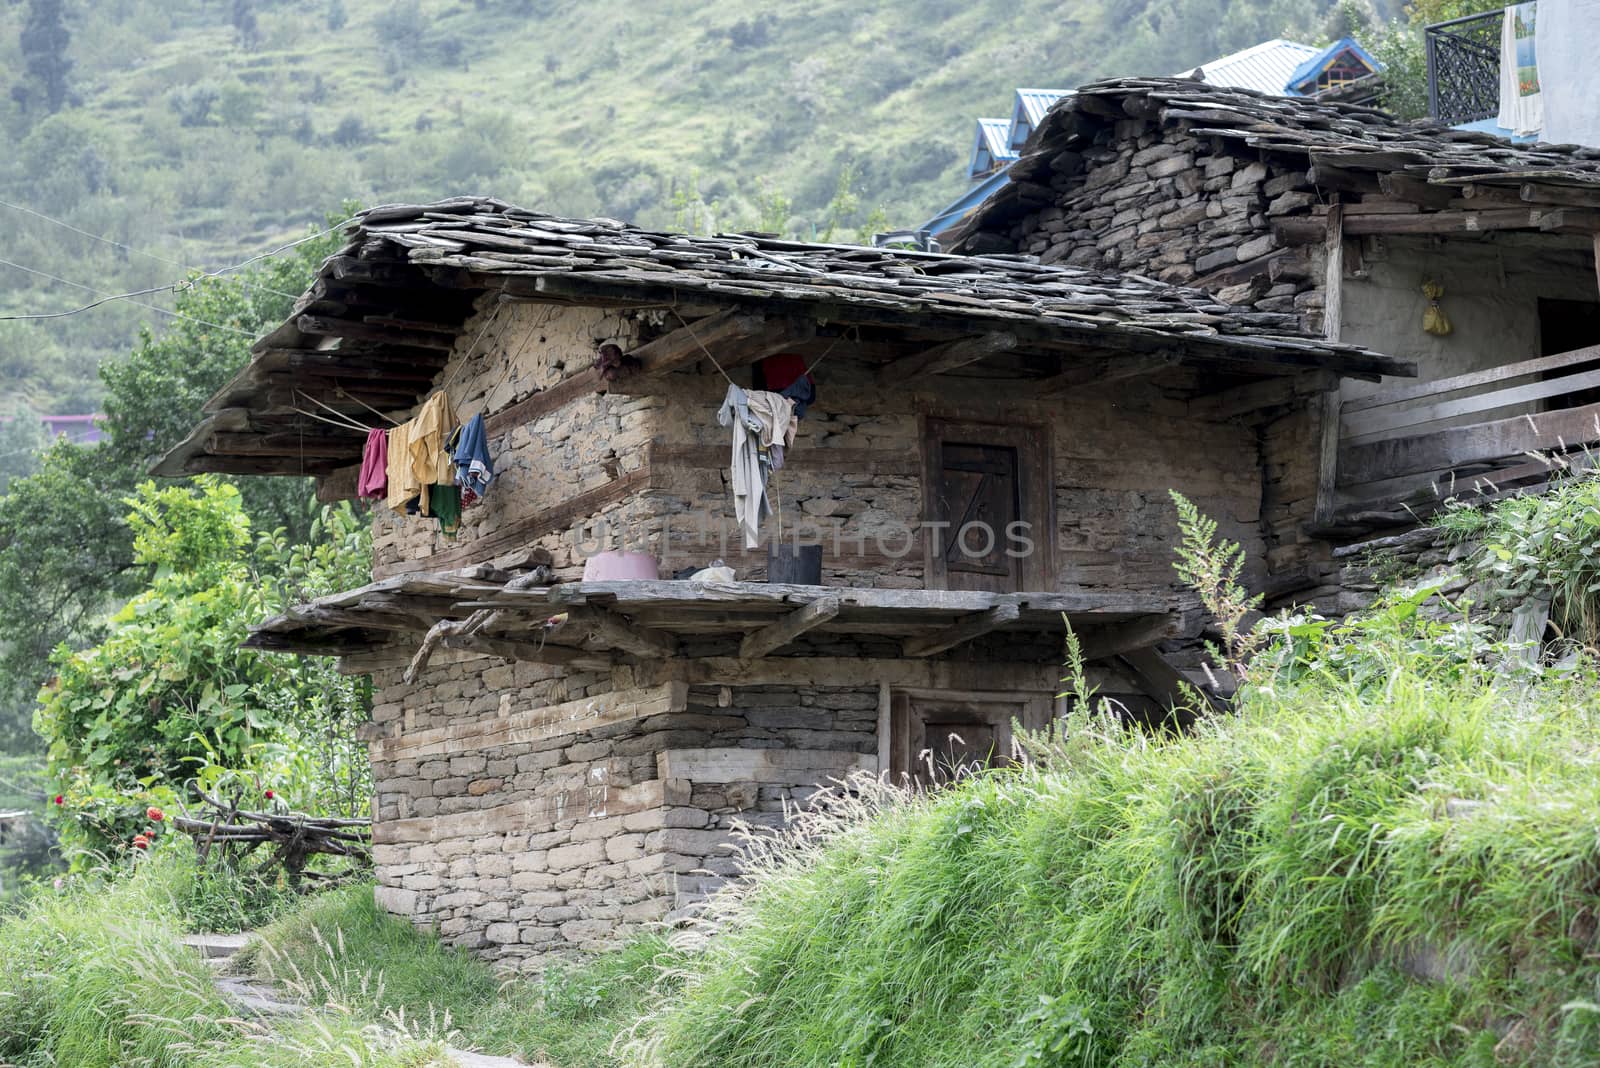 An abandoned traditional style house in the rural Himalayan village Shimla, Himachal Pradesh, India.